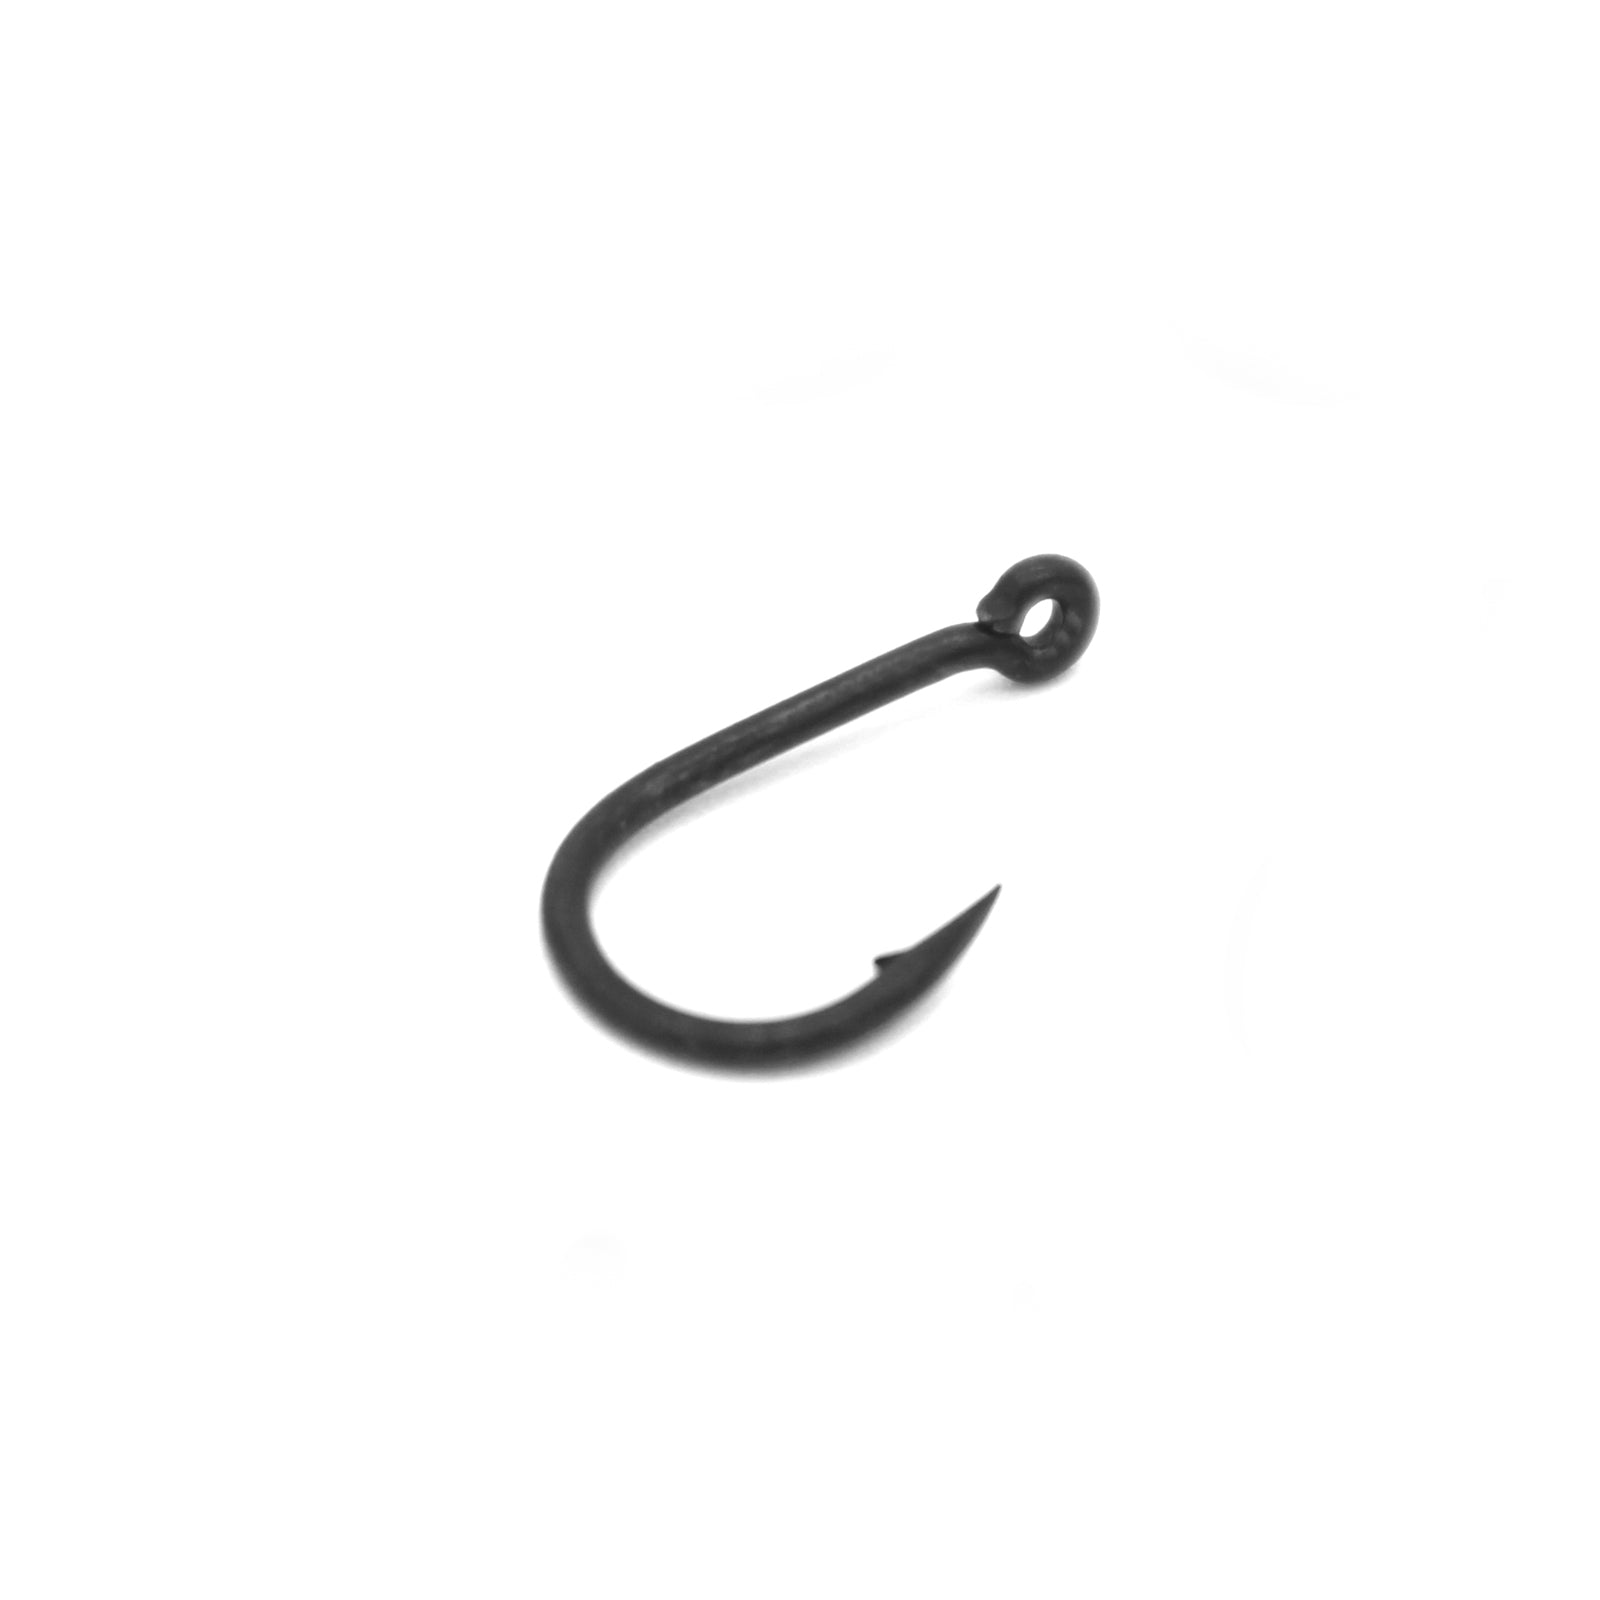 Deception Angling ZWG Micro Barbed Fishing Hook